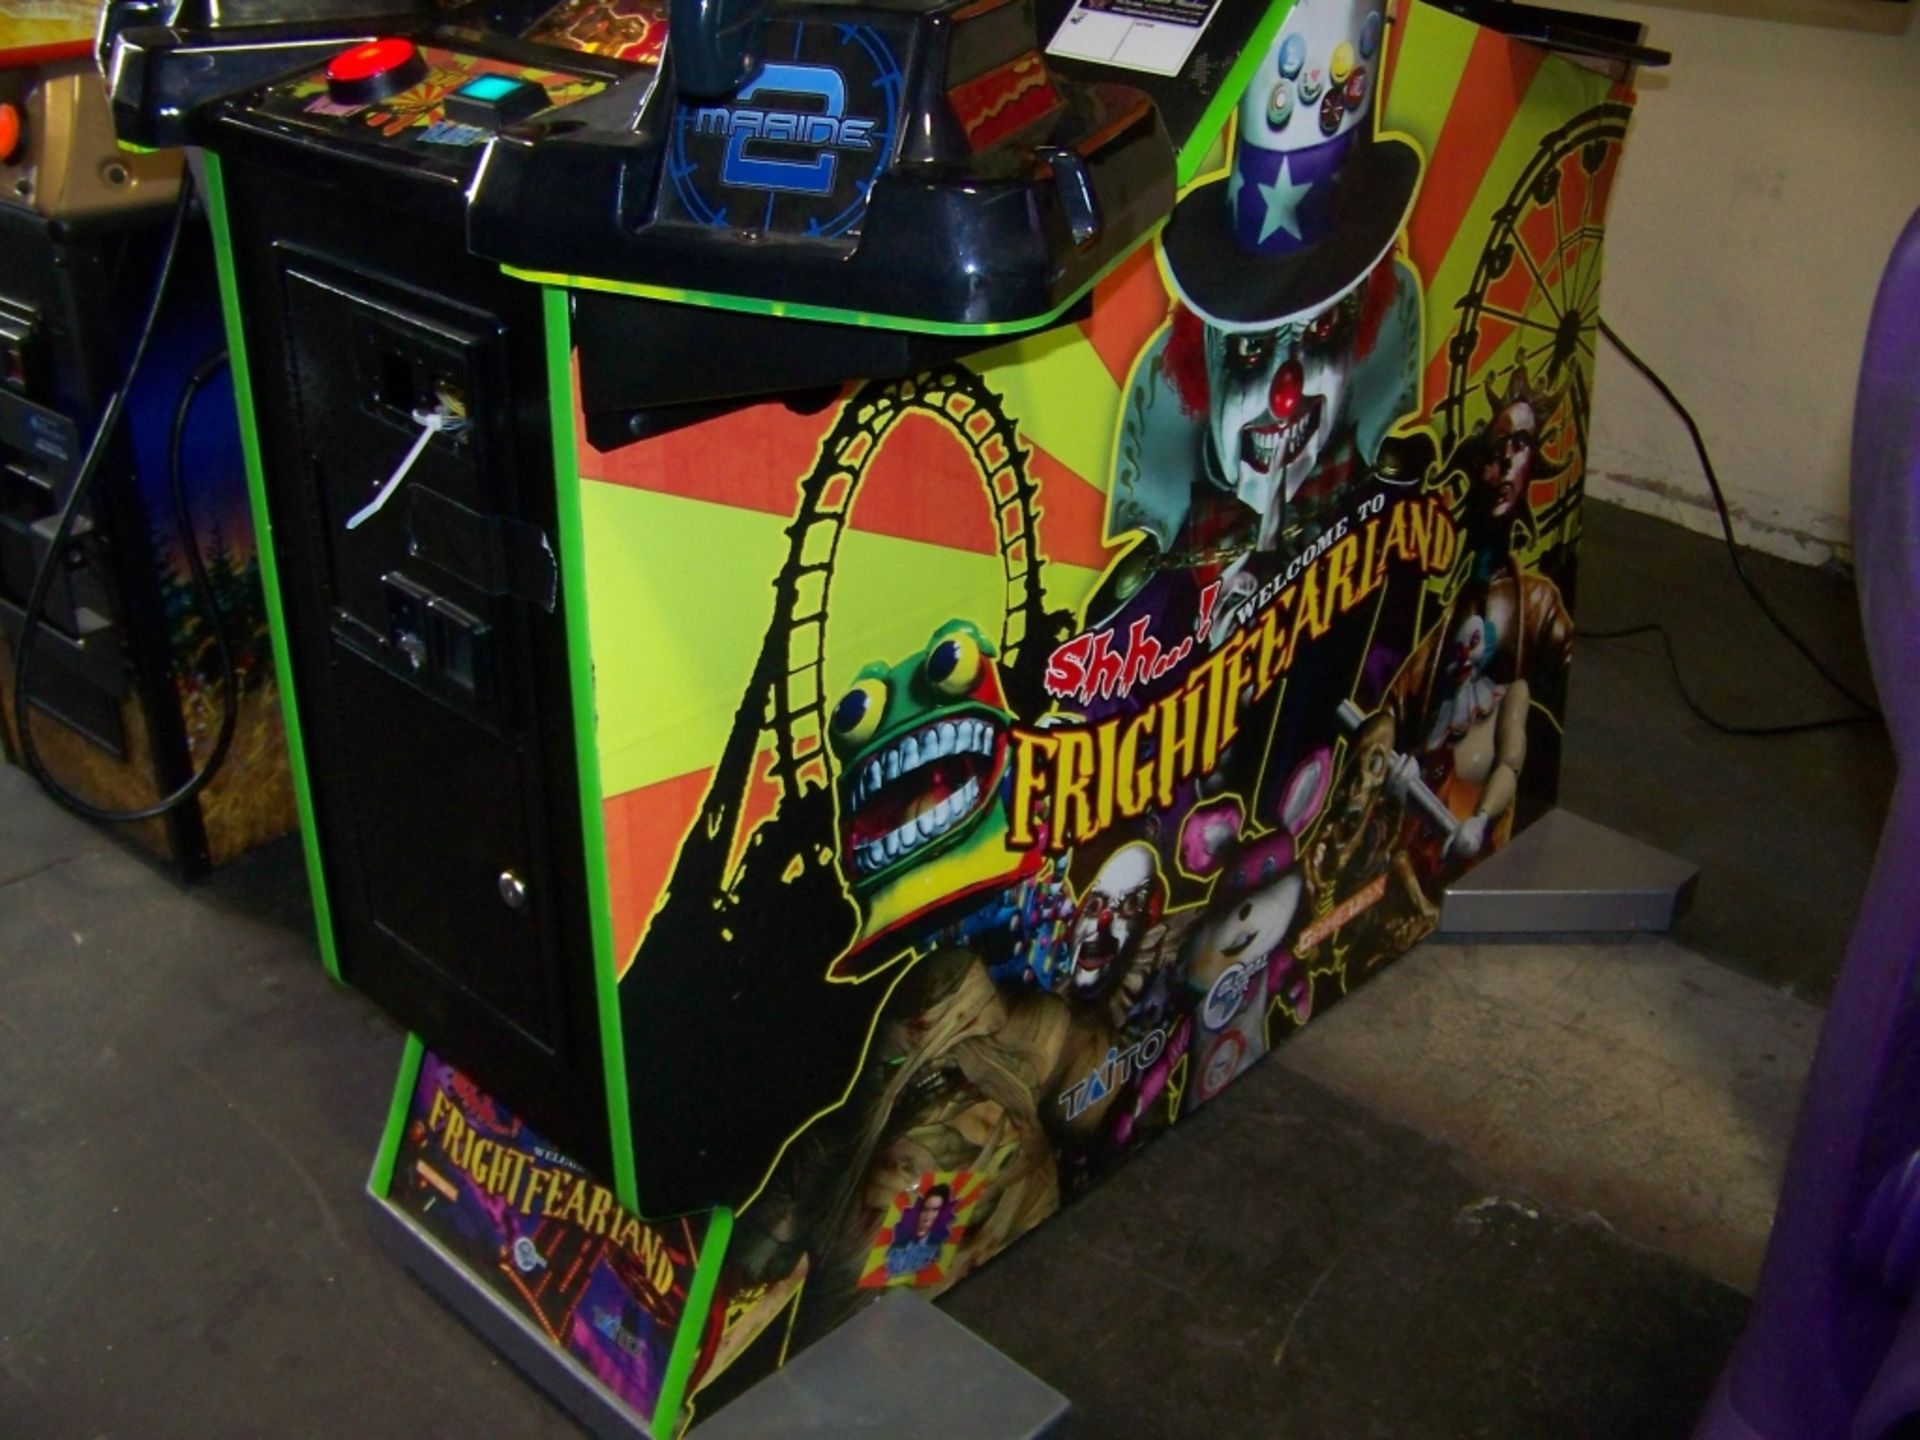 FRIGHT FEARLAND FIXED GUN SHOOTER ARCADE GAME - Image 5 of 6